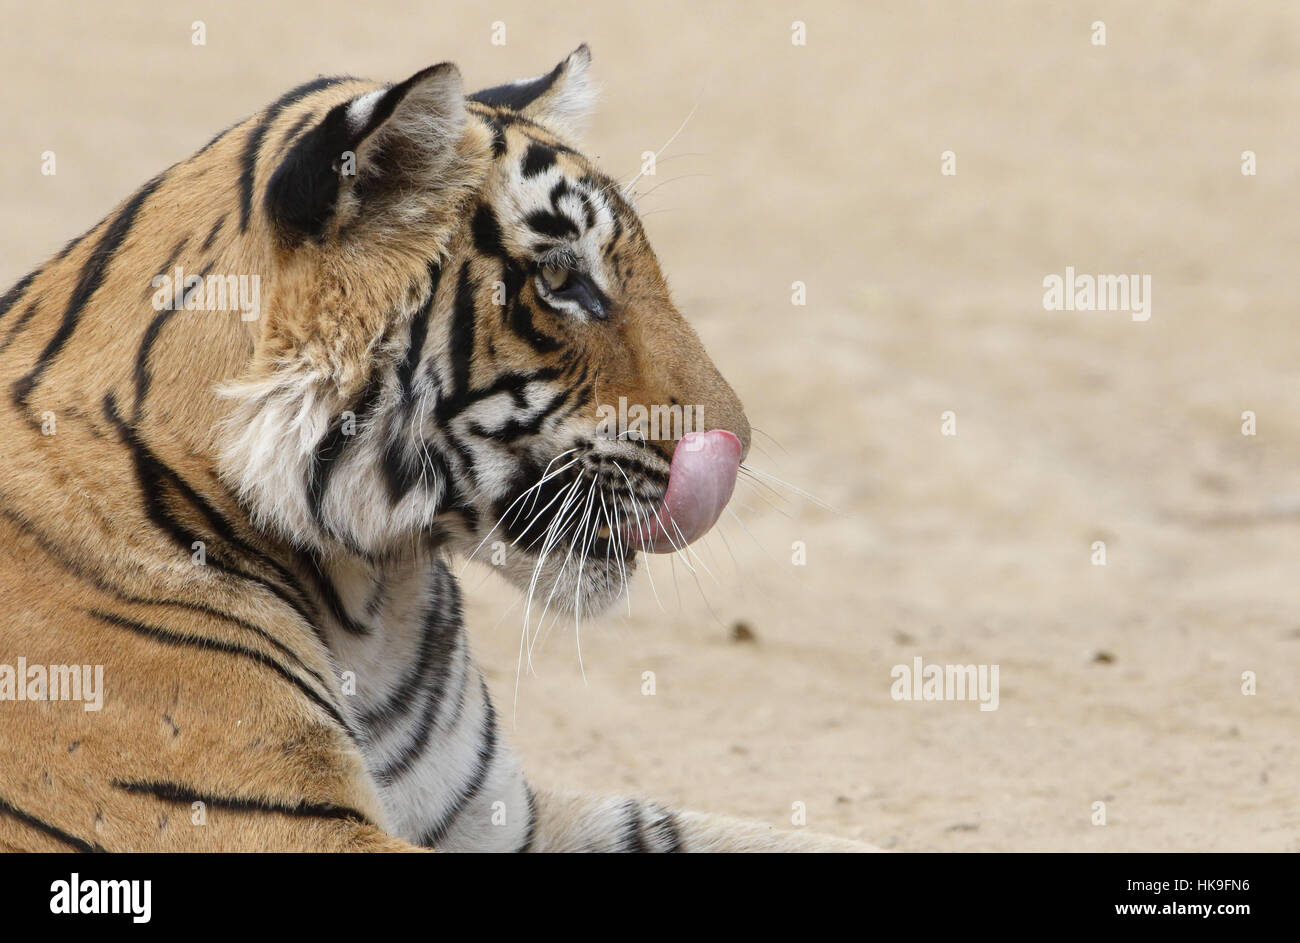 Tiger, Panthera tigris, detail of head of female licking its lips, Ranthambore National Park, Rajasthan, India, February Stock Photo